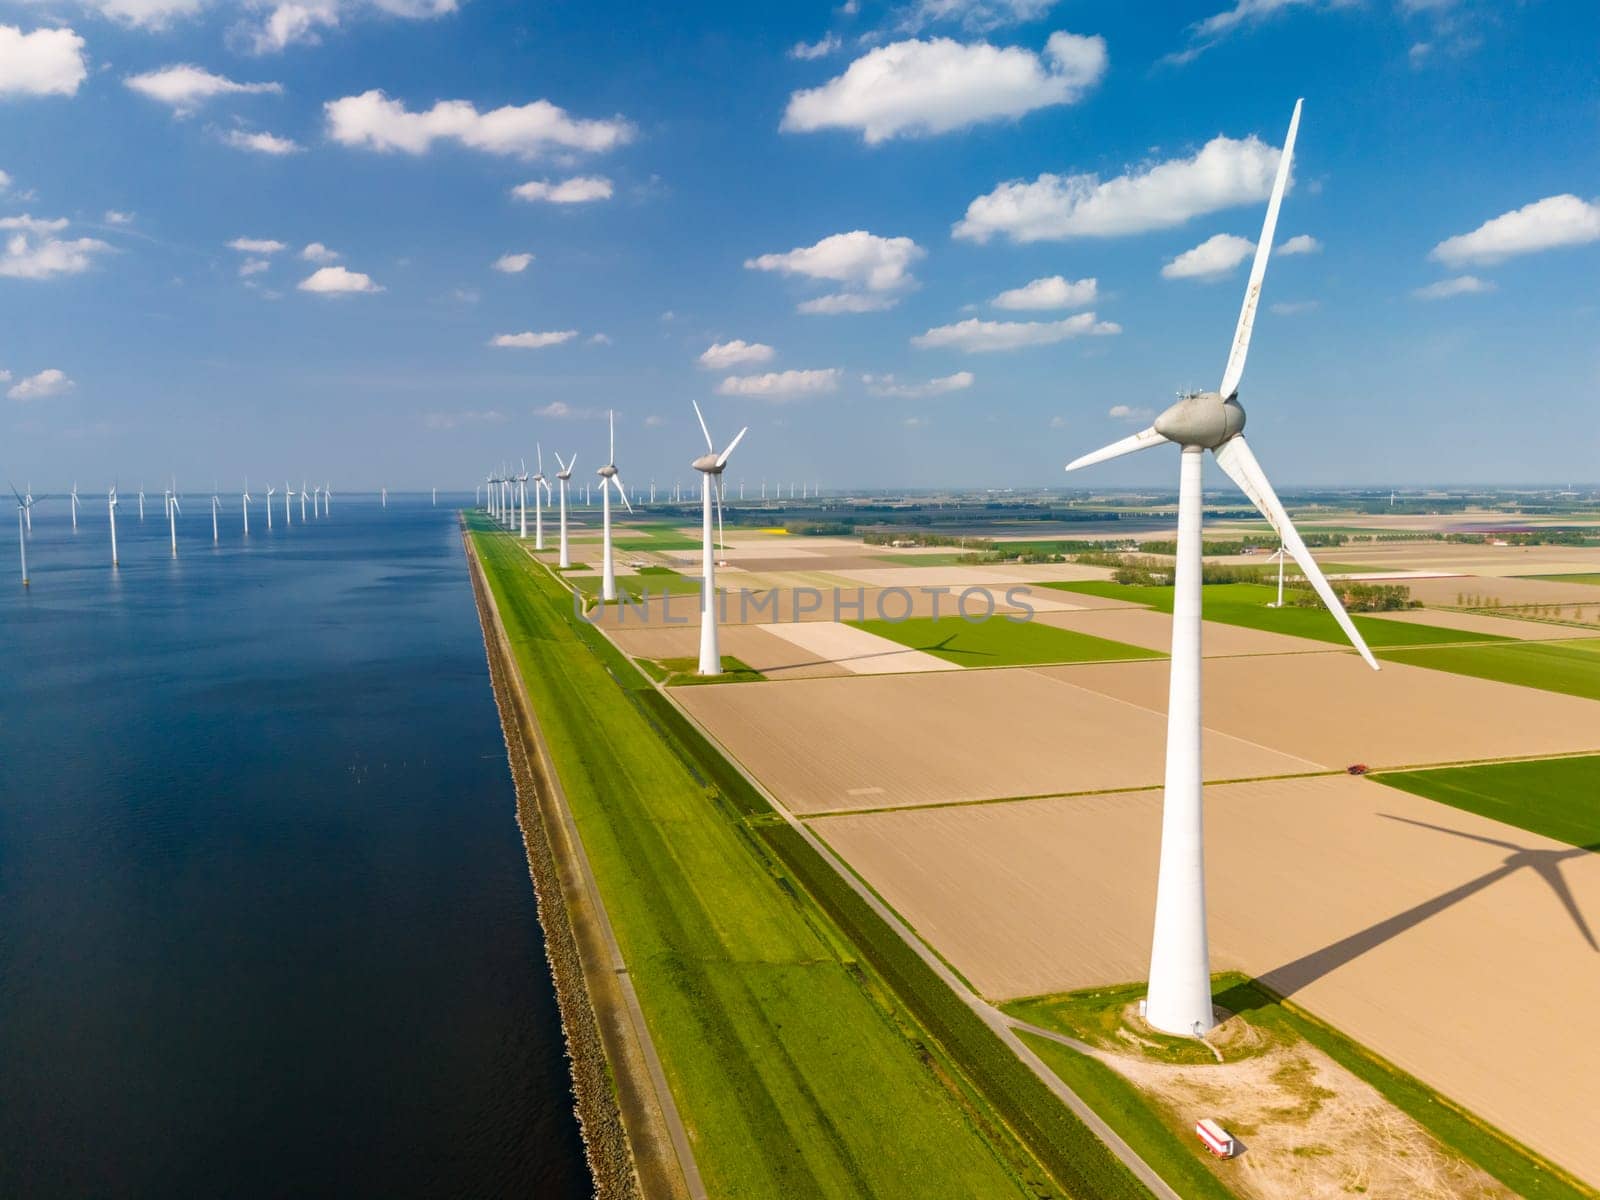 A mesmerizing landscape of wind turbines gracefully spinning in a wind farm by a serene body of water, showcasing sustainable energy production by fokkebok